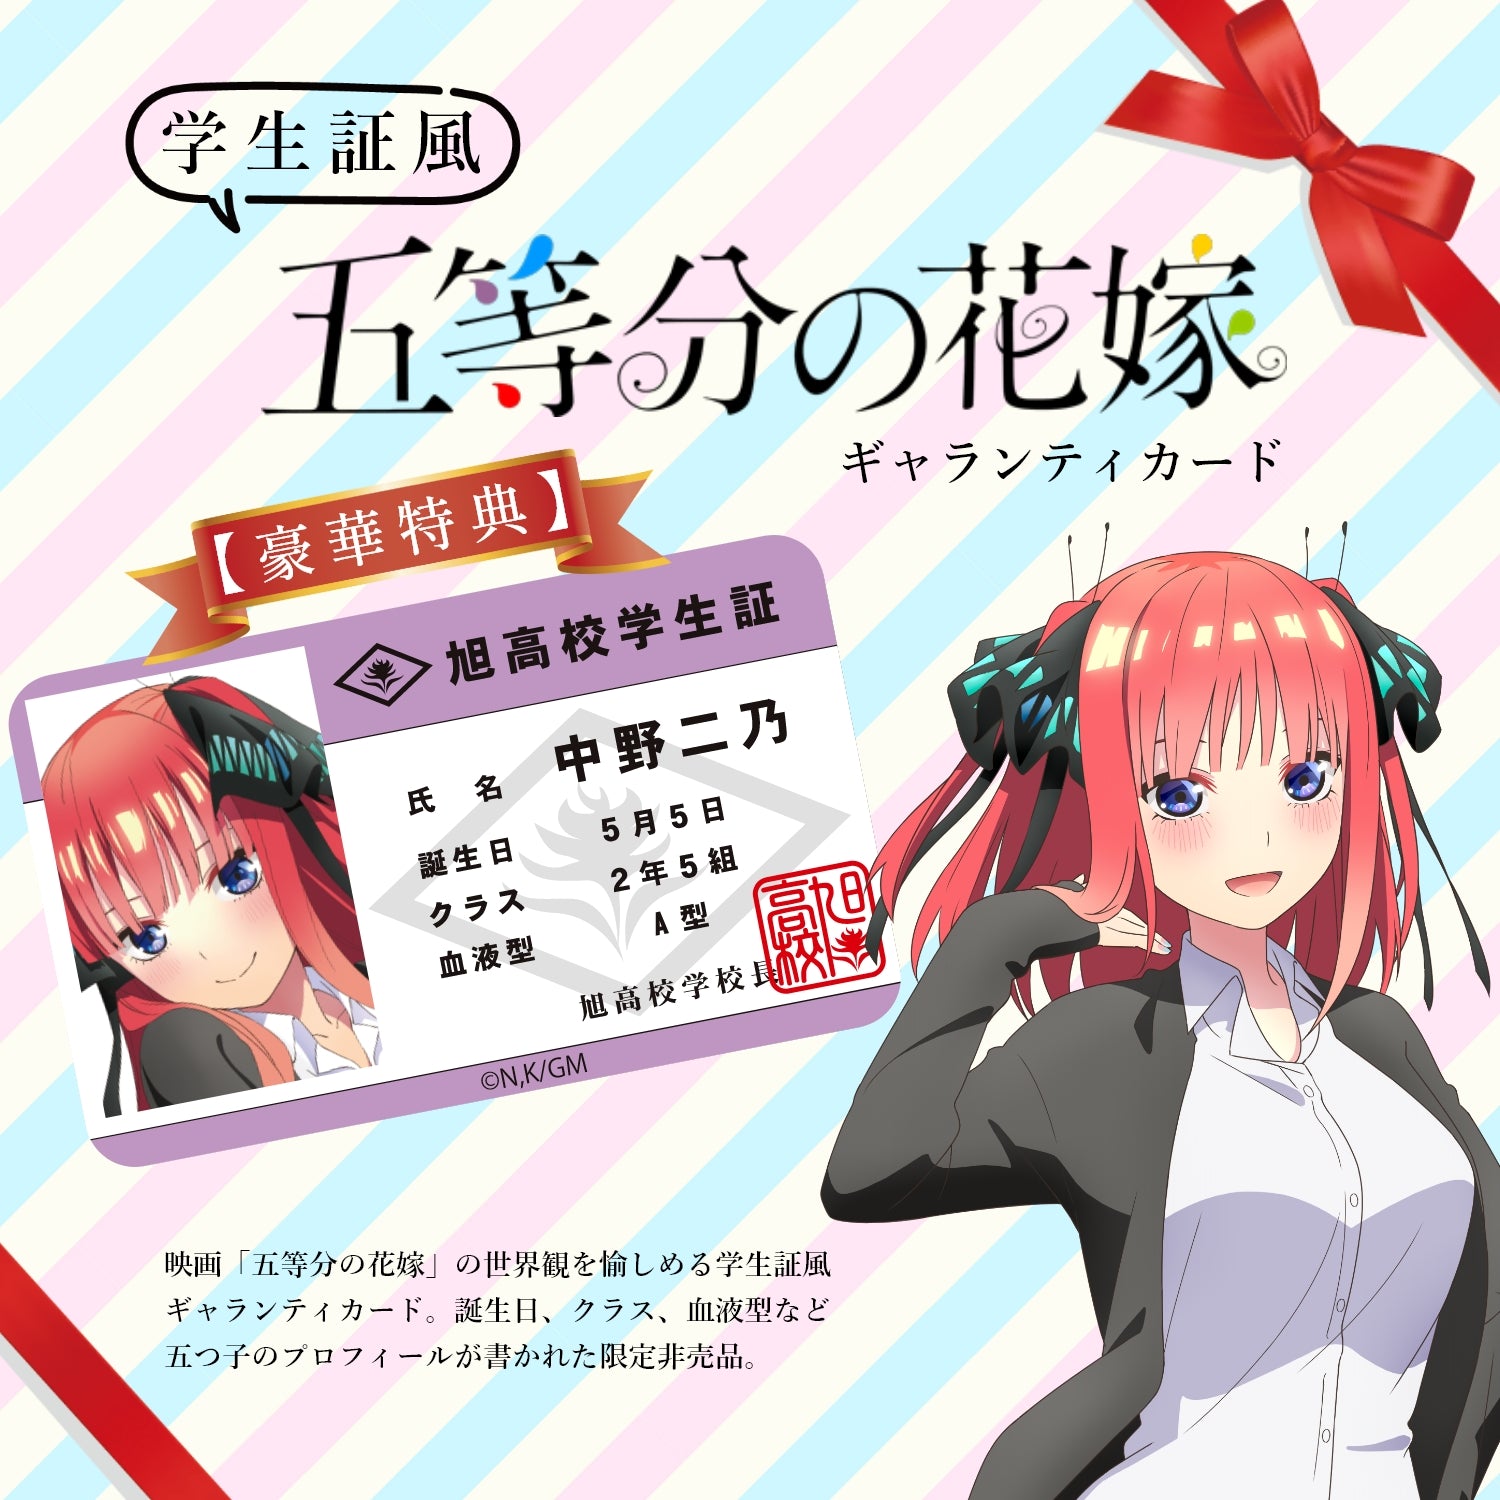 The Quintessential Quintuplets Movie Italian Leather Wallet | Nino Nakano Model